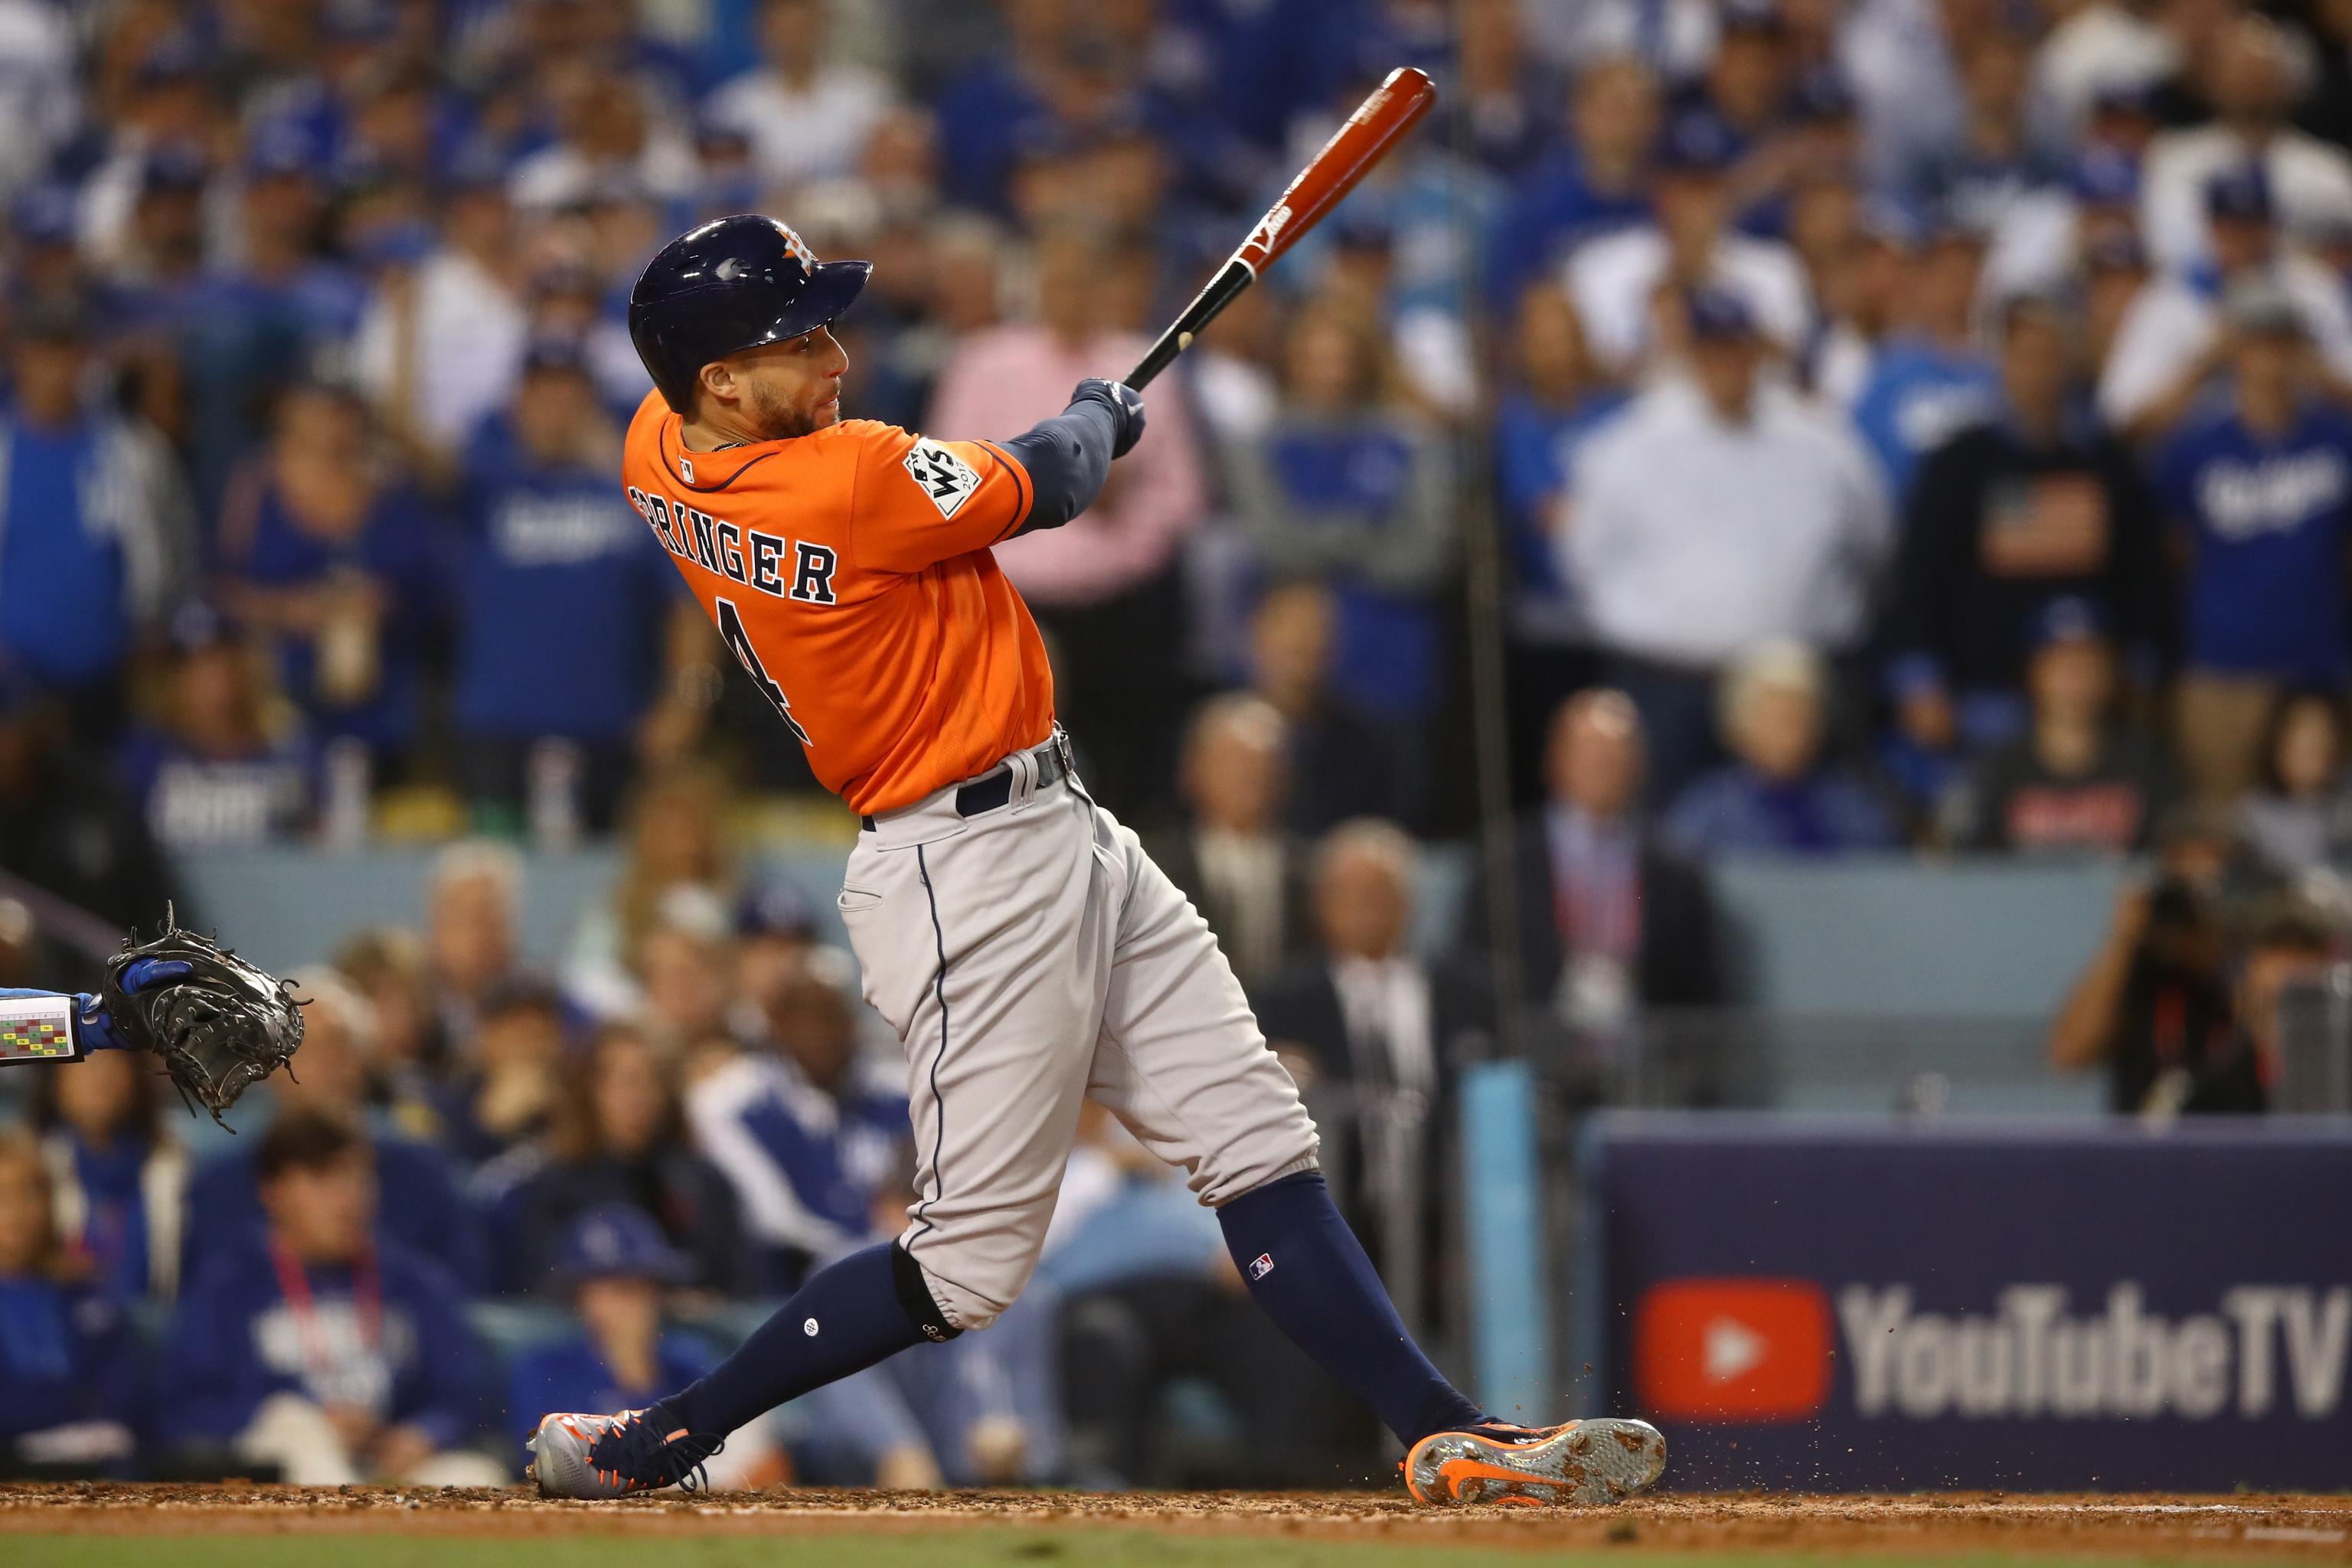 George Springer wins MVP as Houston Astros beat Dodgers in Game 7 of World  Series to clinch first title